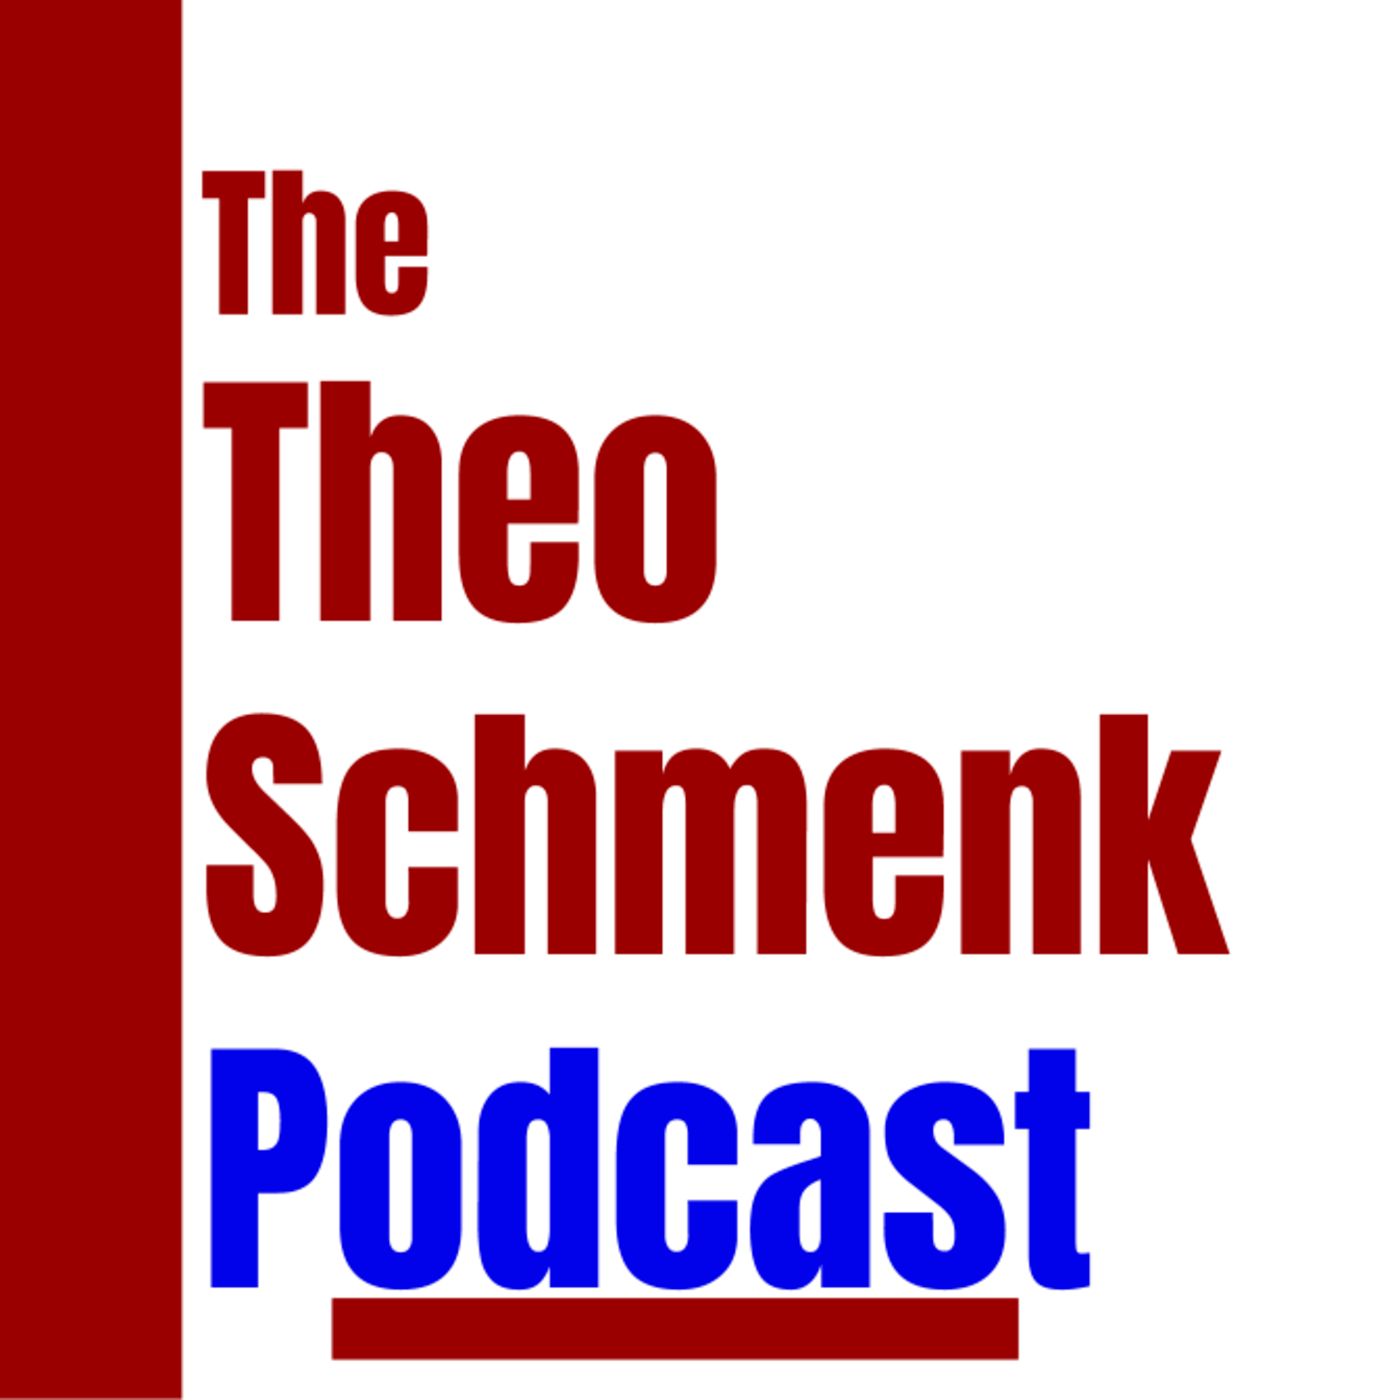 The Theo Schmenk Podcast